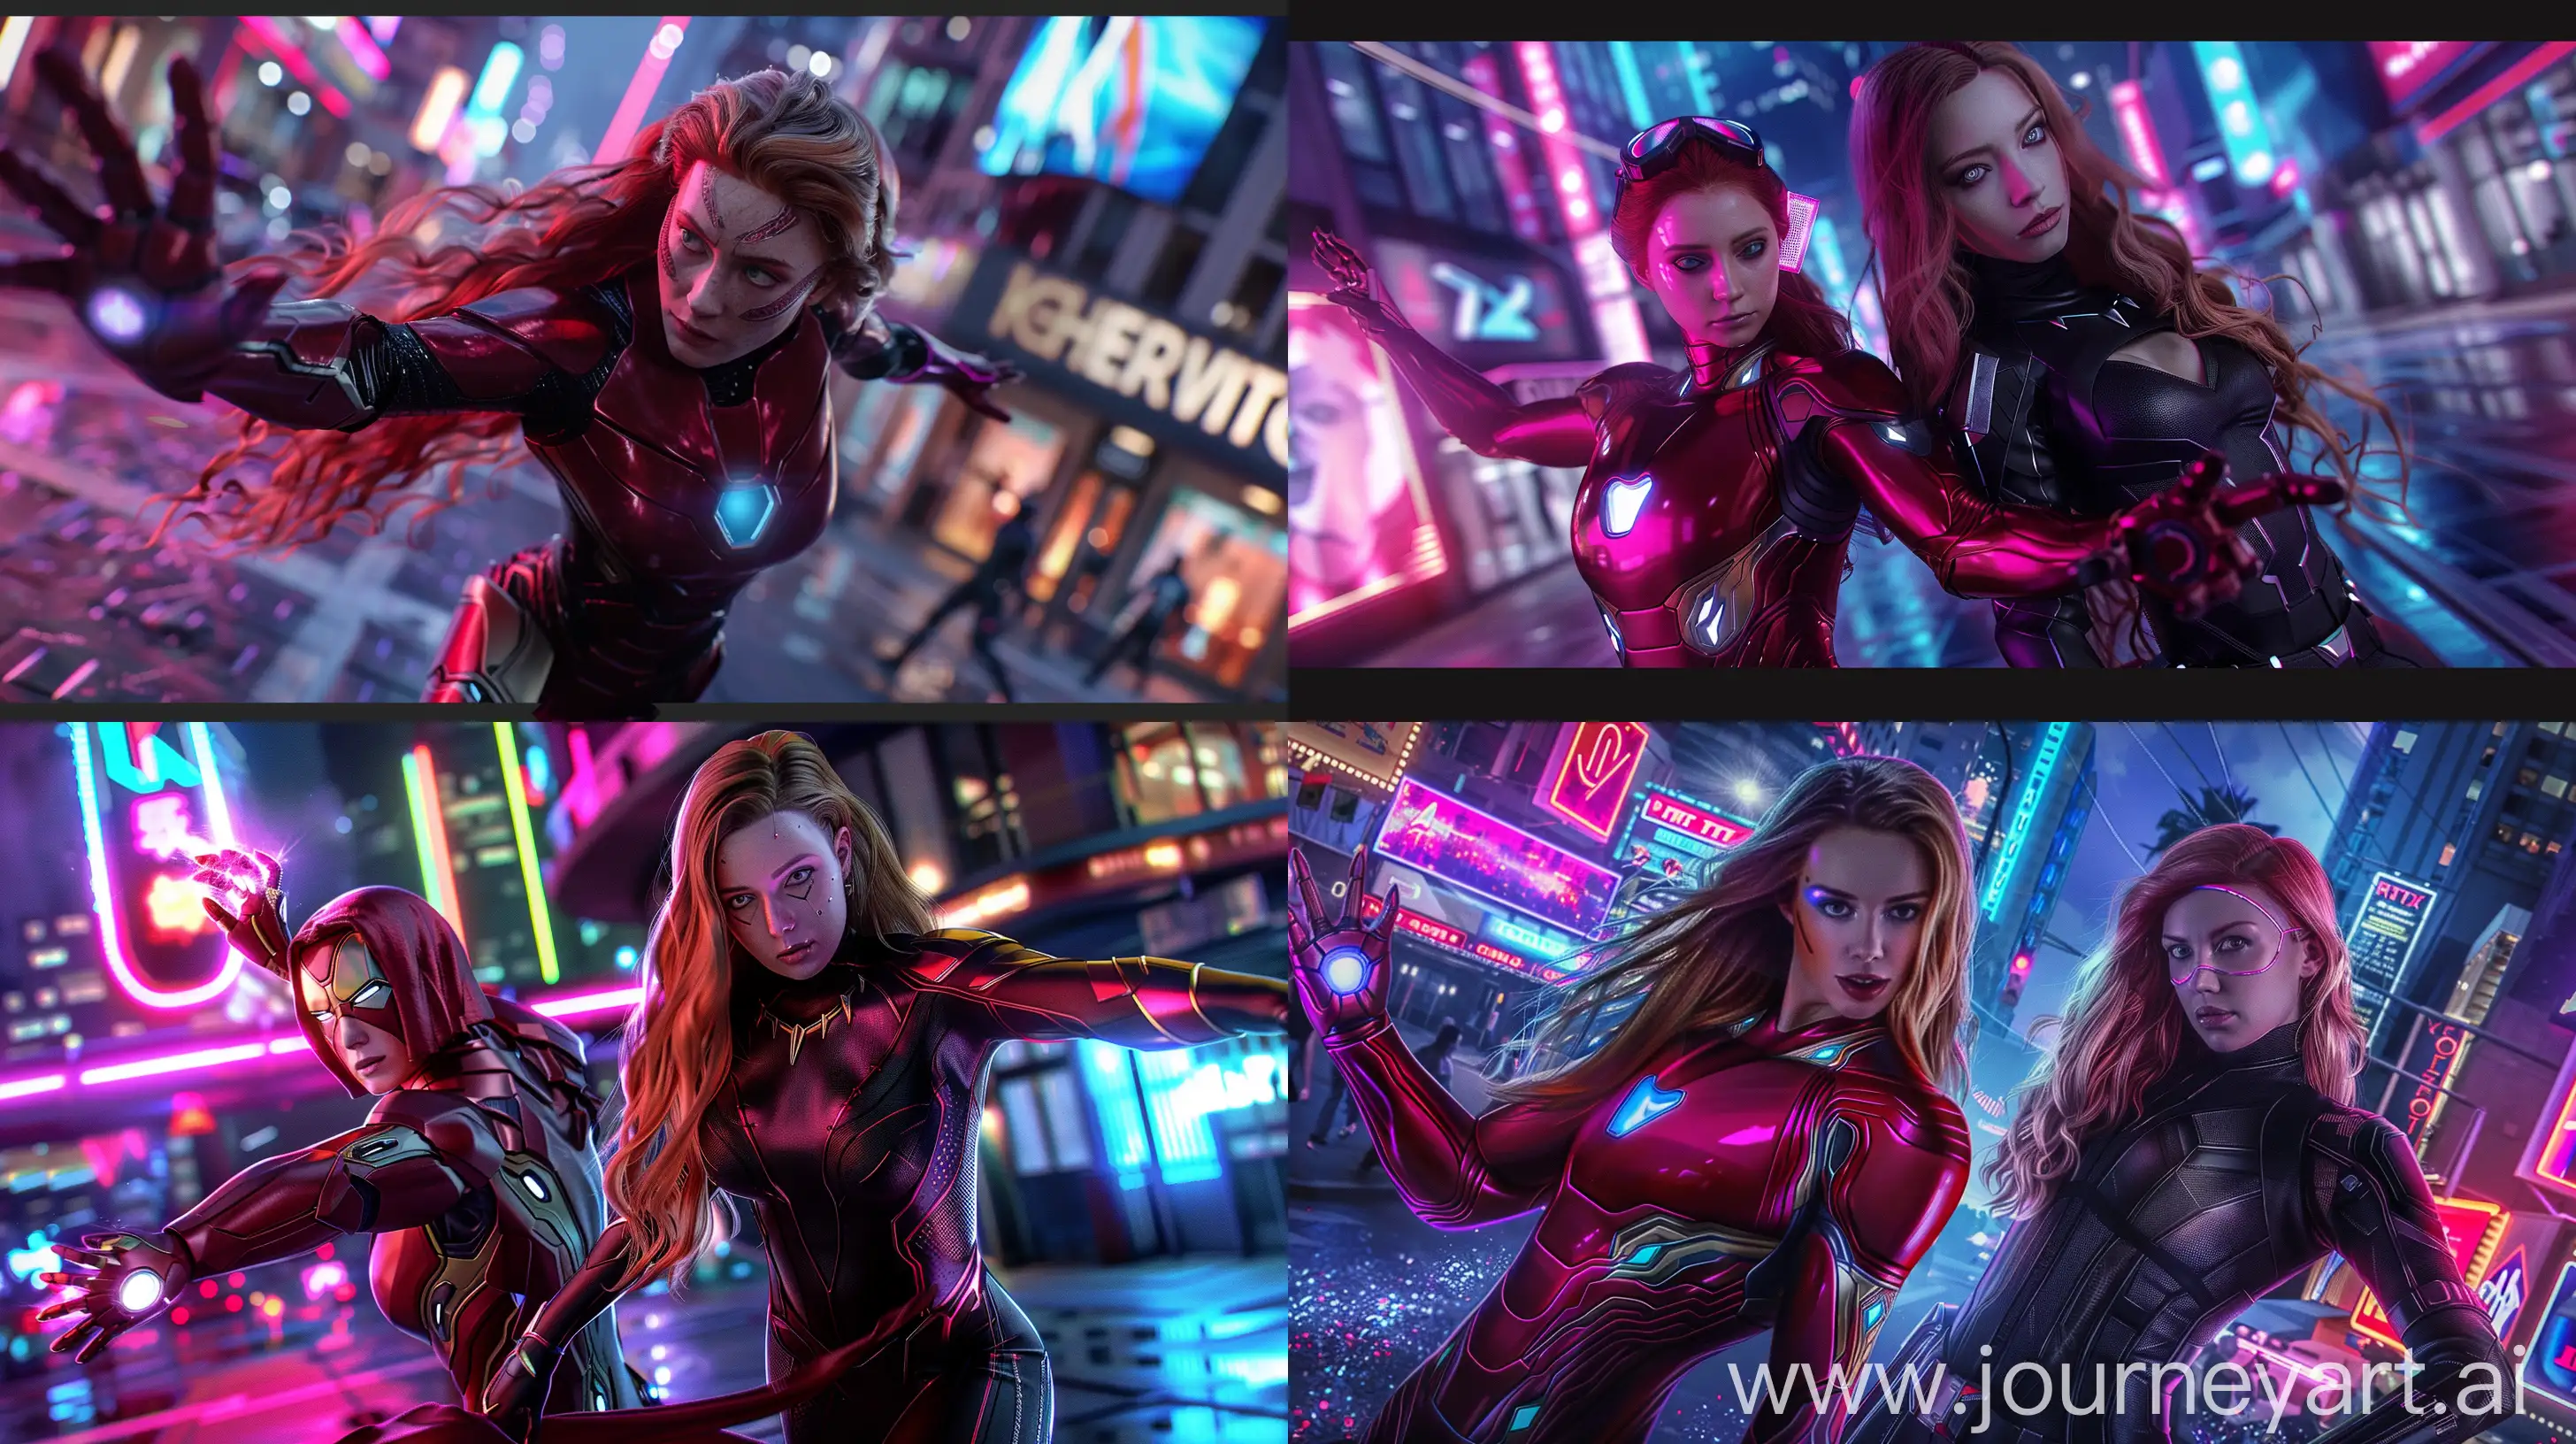 Futuristic-Scarlet-Witch-Iron-Man-and-Black-Widow-Black-Panther-Mix-in-Neon-Cityscape